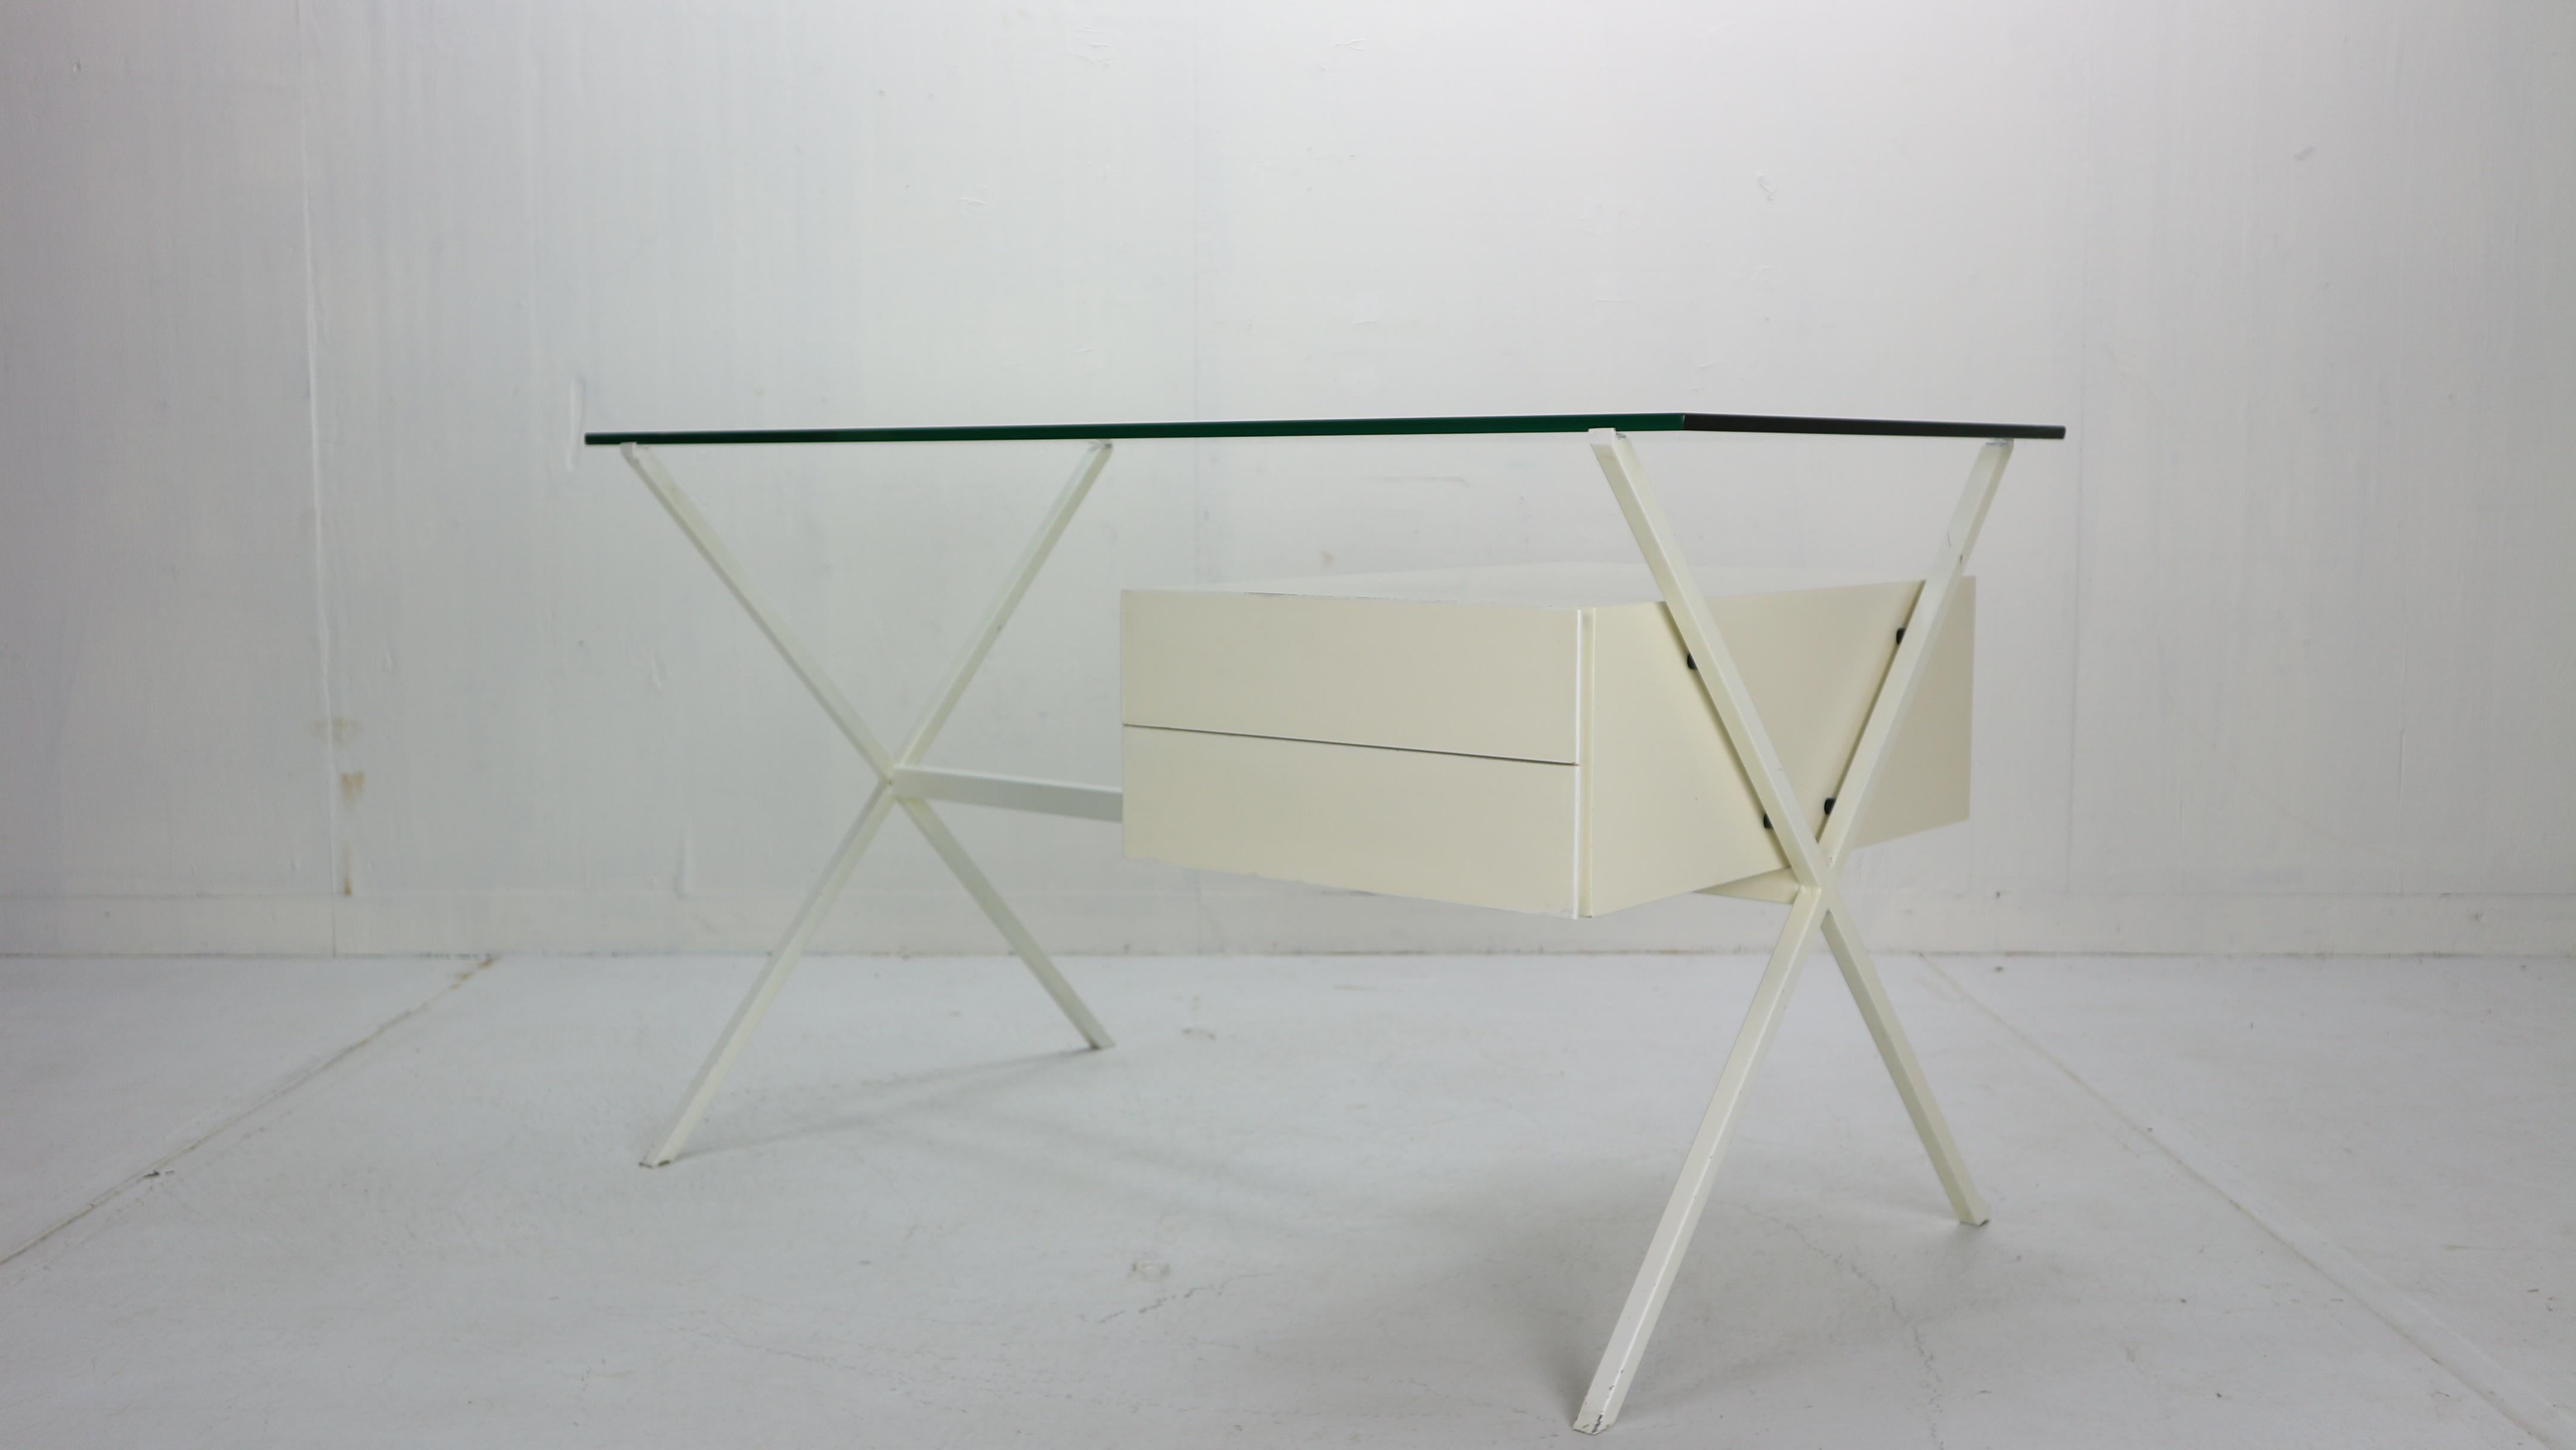 Rare and early age writing desk designed by Franco Albini and manufactured by Knoll International. This desk was designed in 1949 and produced for many years by Knoll International.

It features an X-form white painted metal base supporting a